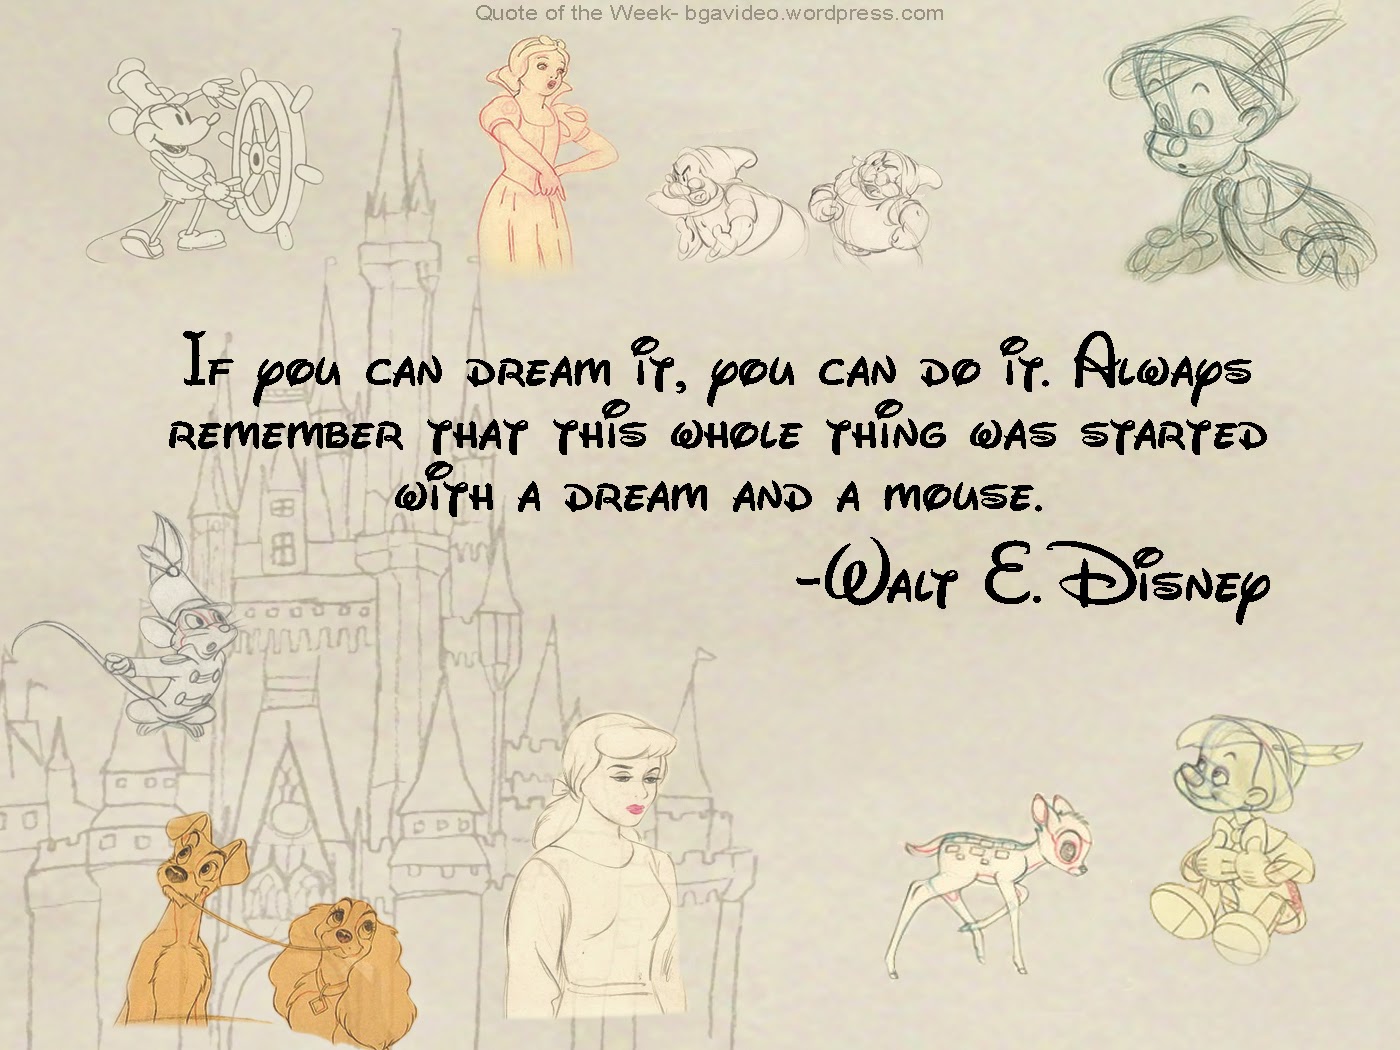 Inspirational Quotes From Disney QuotesGram 1400x1050